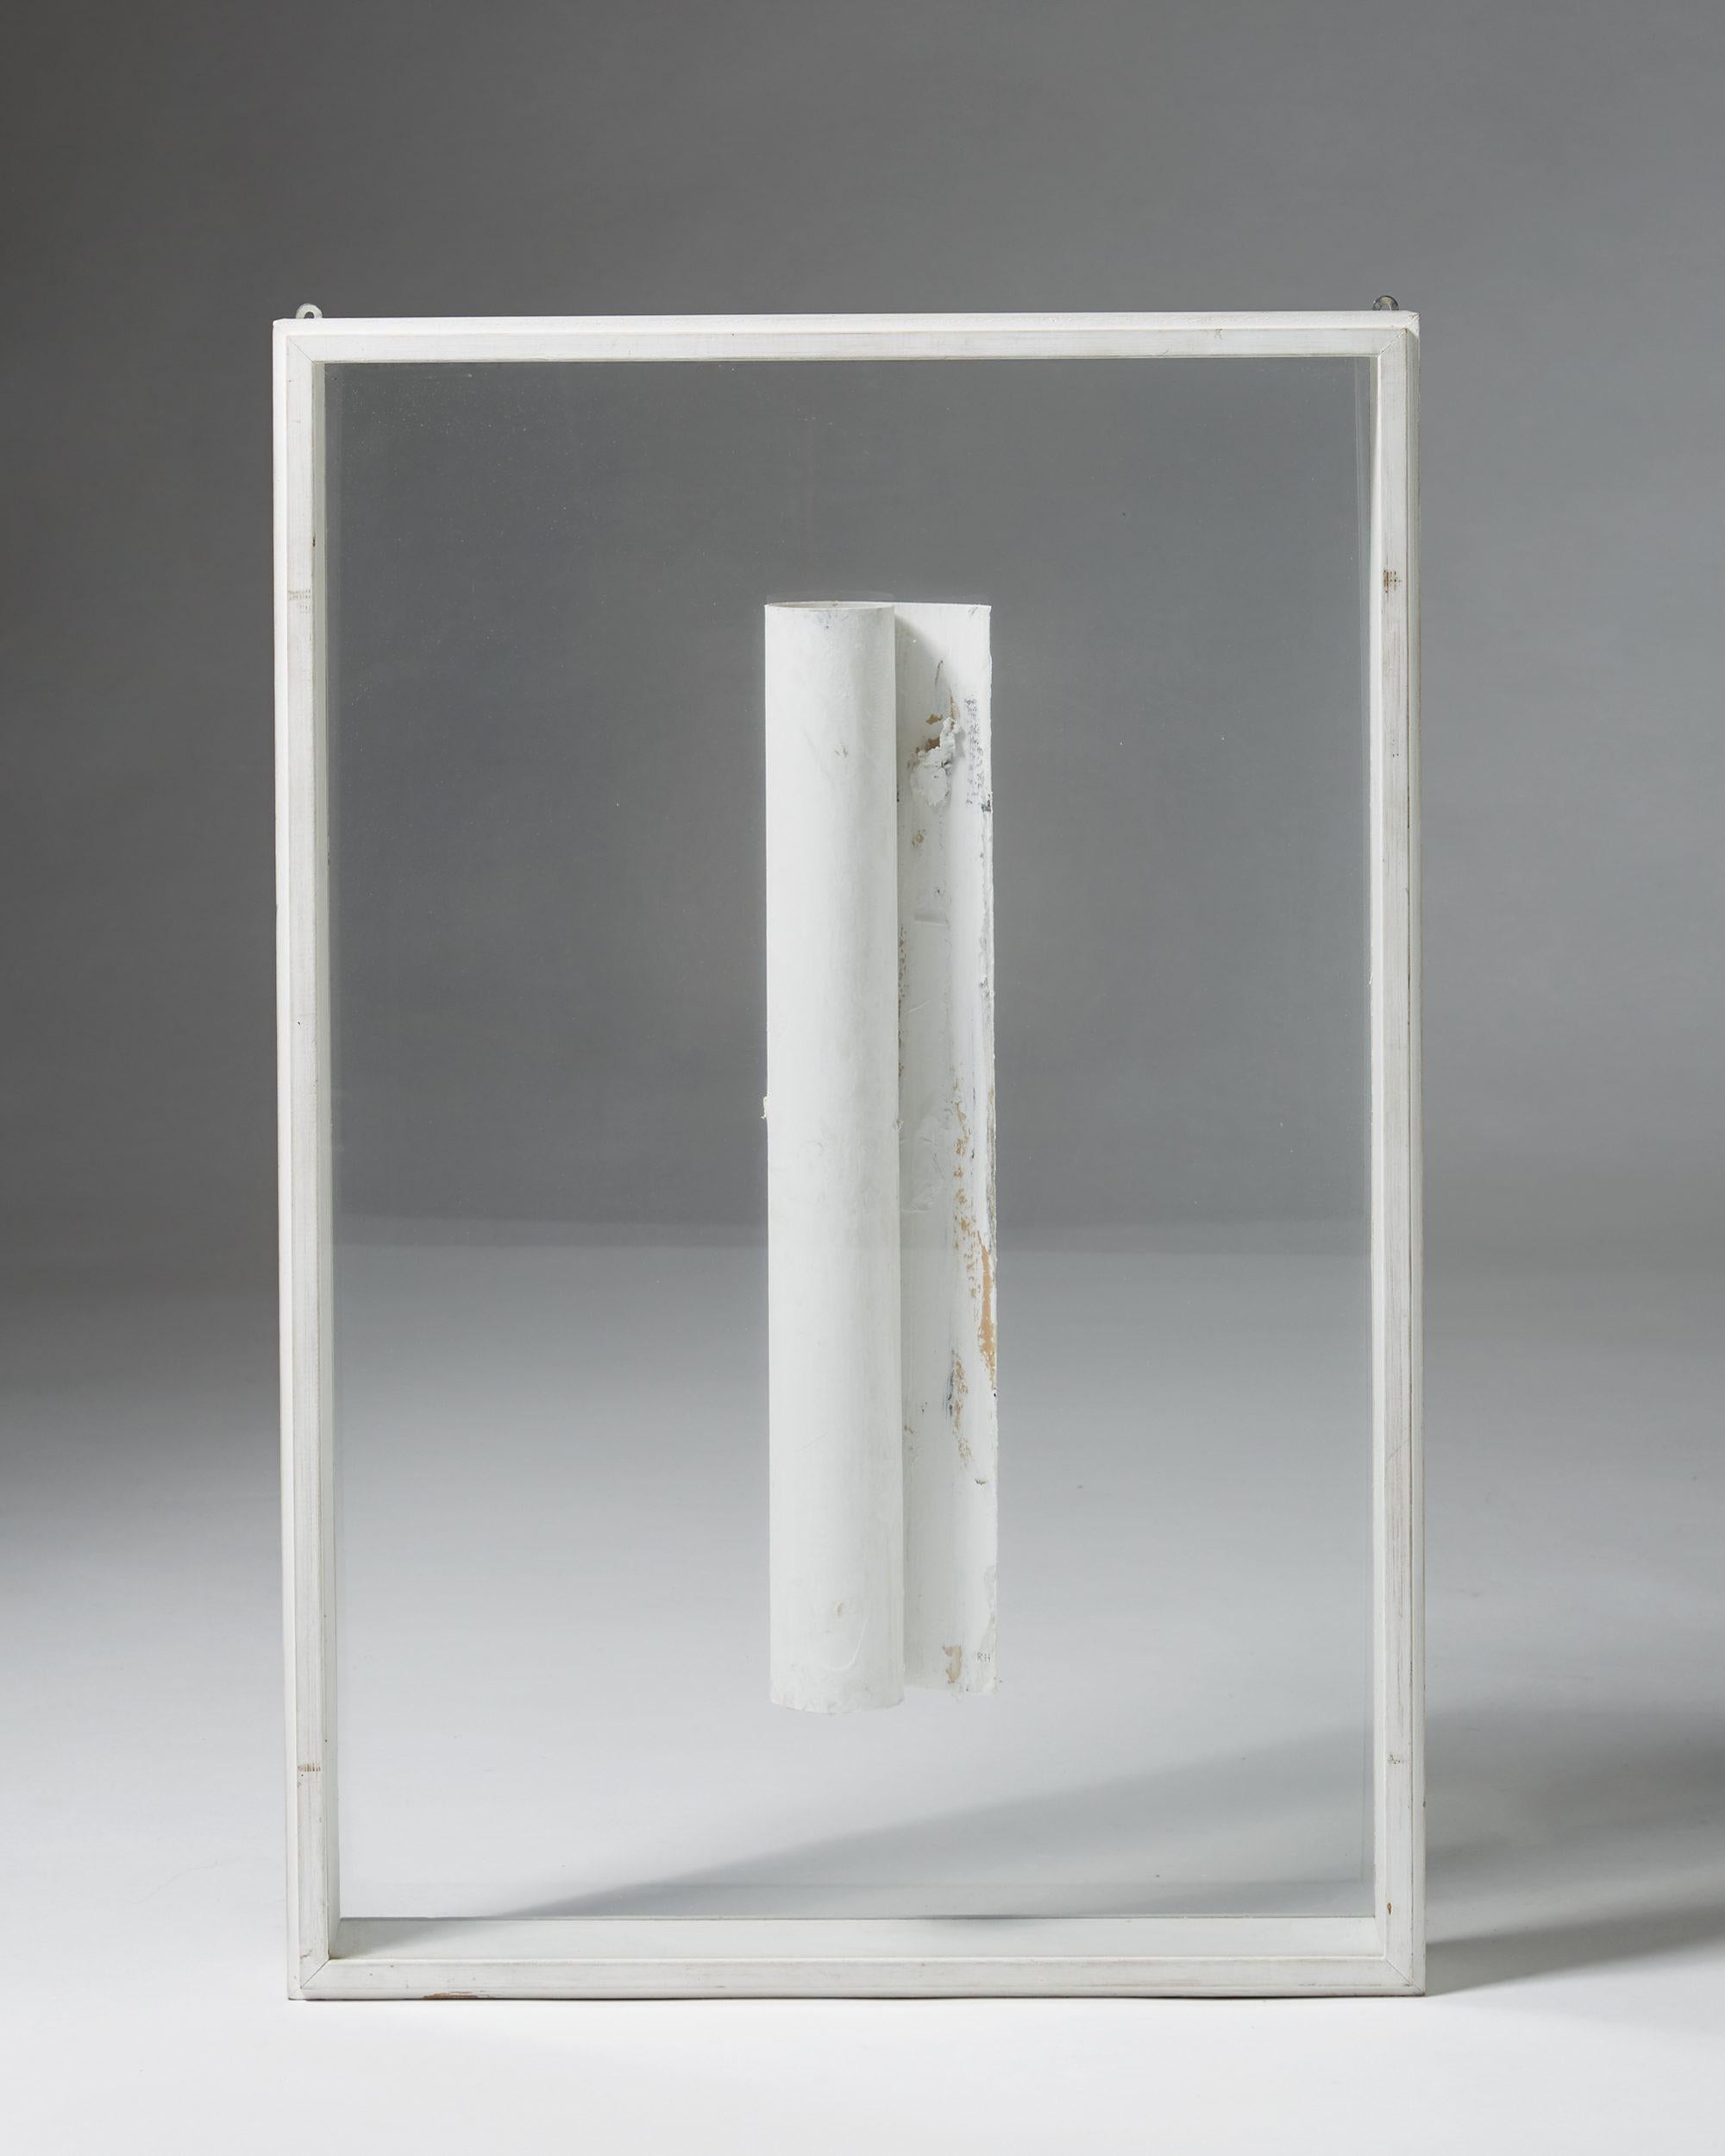 Framed object by Rune Hagberg, Sweden, 1970s.

Mixed-media.

Measurements: 
H: 77 cm/ 2' 6 ¾”
W: 52 cm/ 20 ½”
D: 8 cm/ 3 3/8”.

Born in Uppsala, Sweden, Hagberg became heavily influenced by Eastern calligraphy throughout his life – and developed a